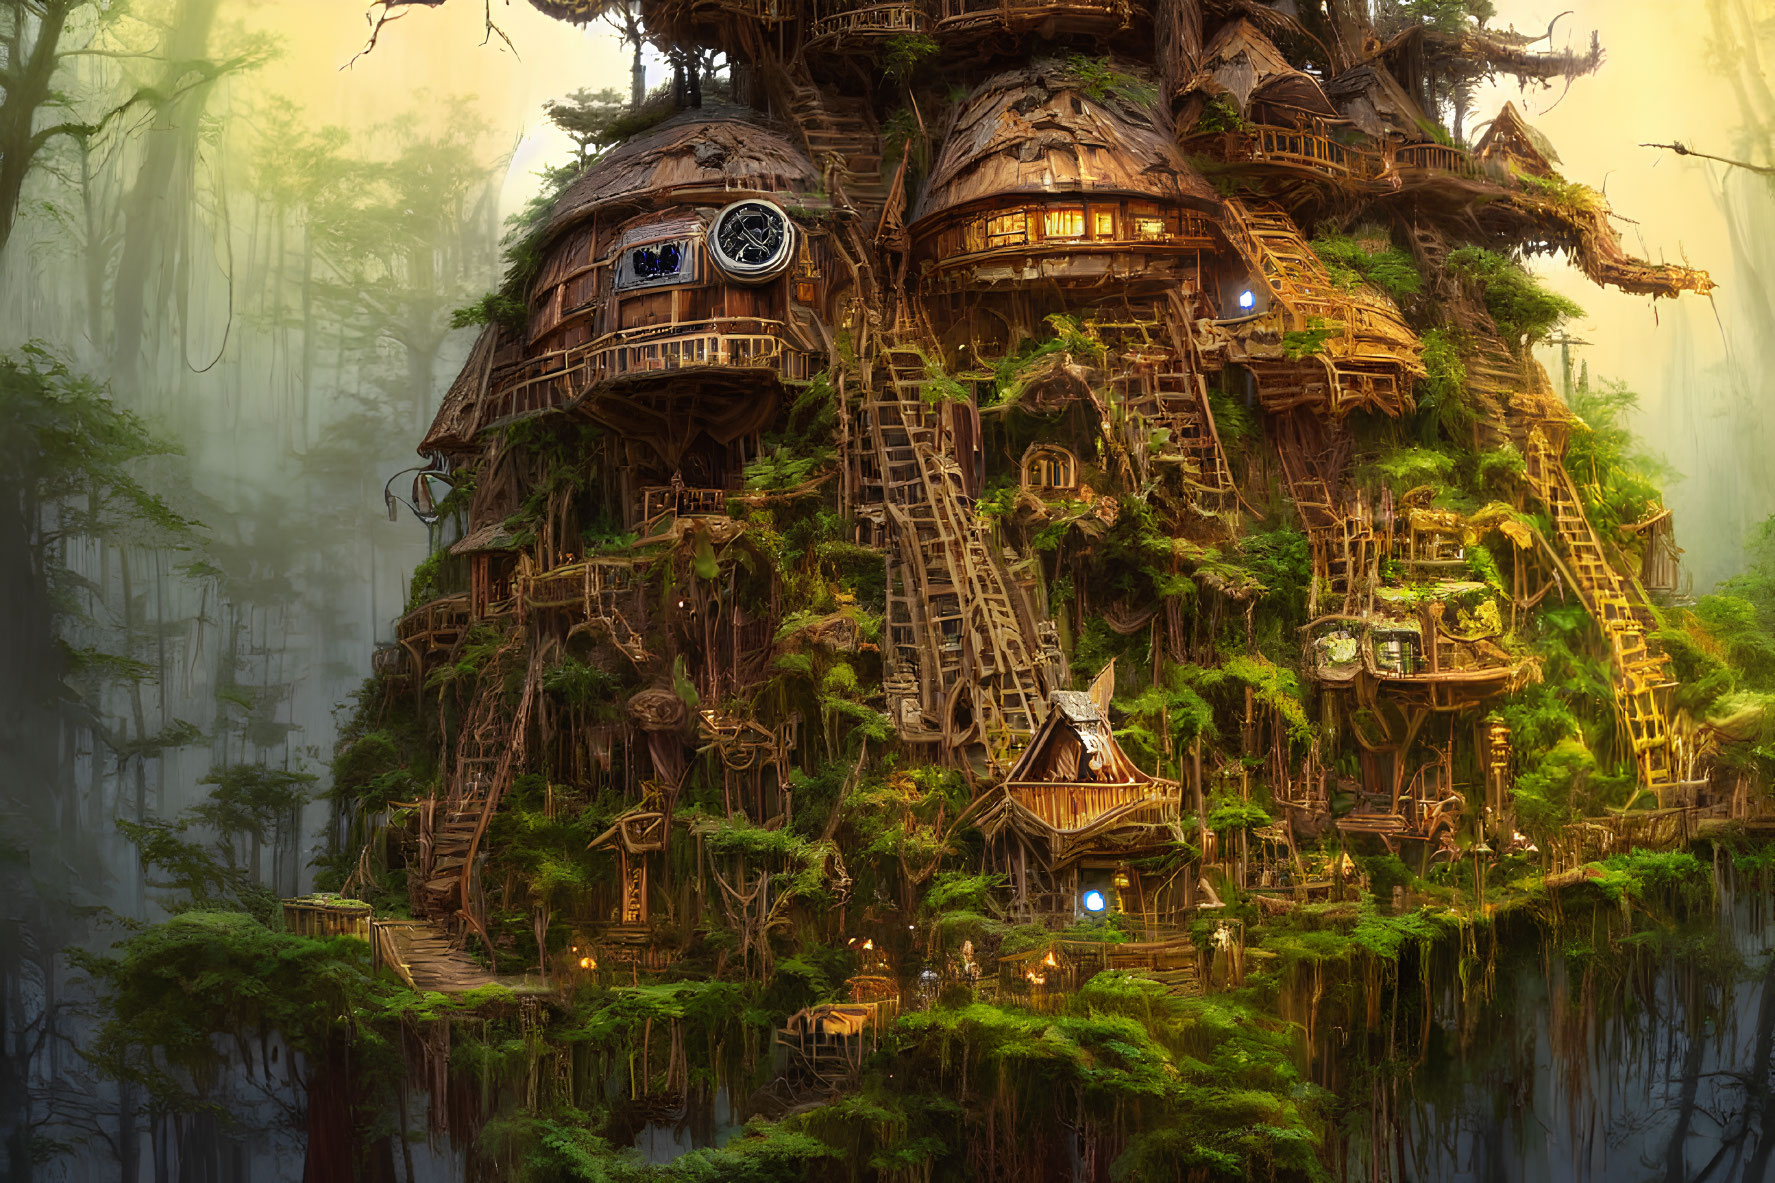 Whimsical treehouse in misty enchanted forest